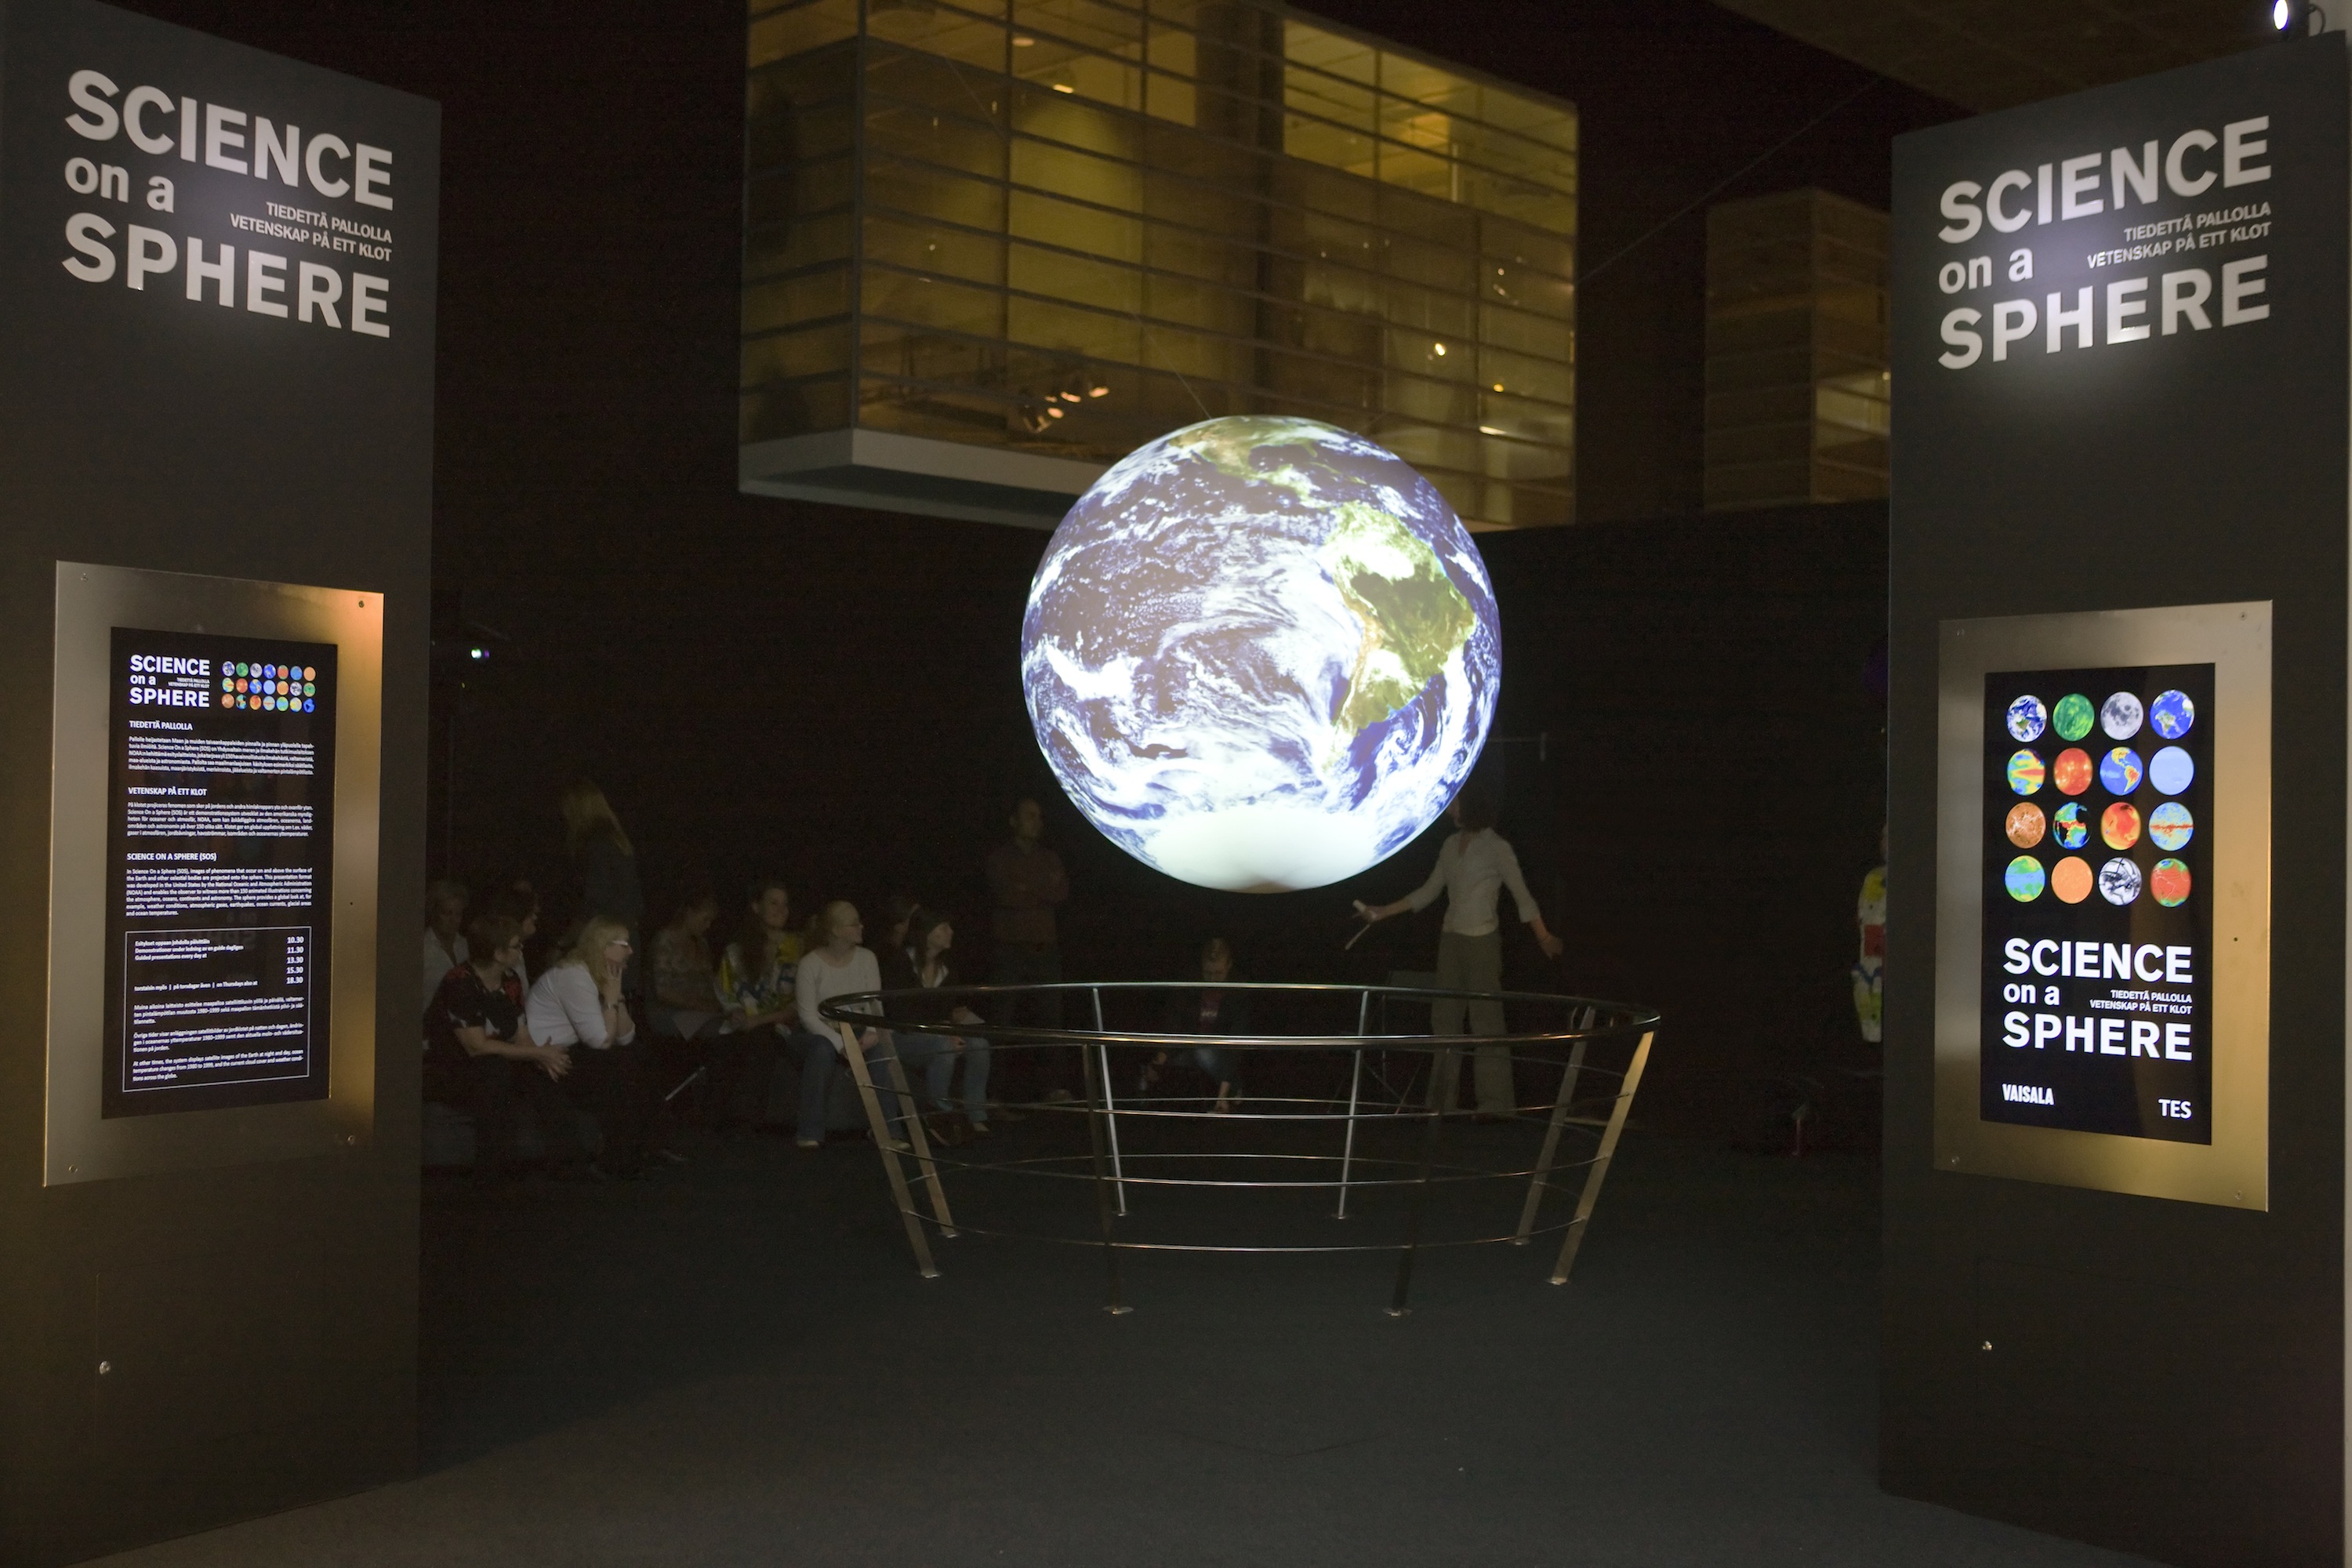 A group of people sit, watching a presentation on Science On a Sphere. Two signs with vertical monitors embedded in them frame the Sphere in the foreground